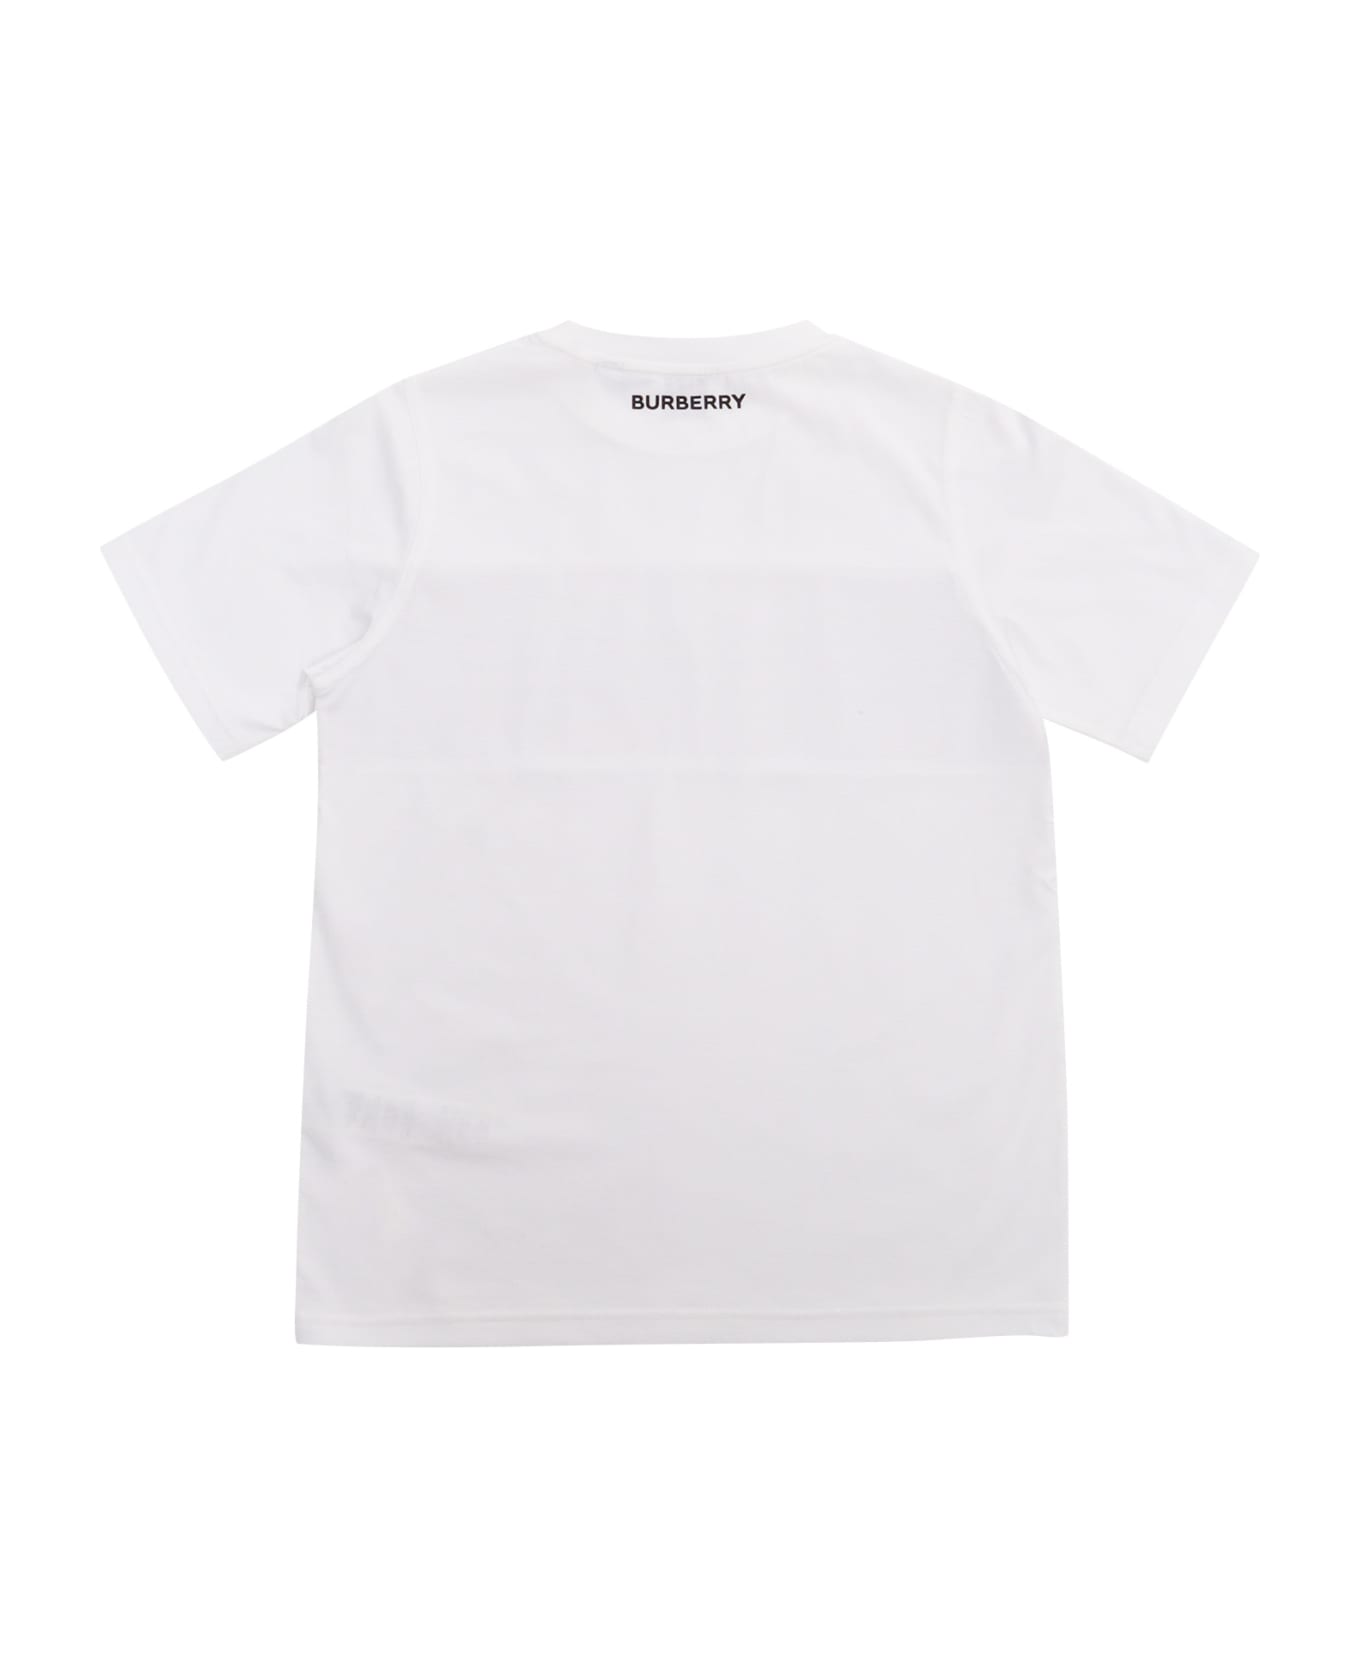 Burberry White T-short With Print - WHITE